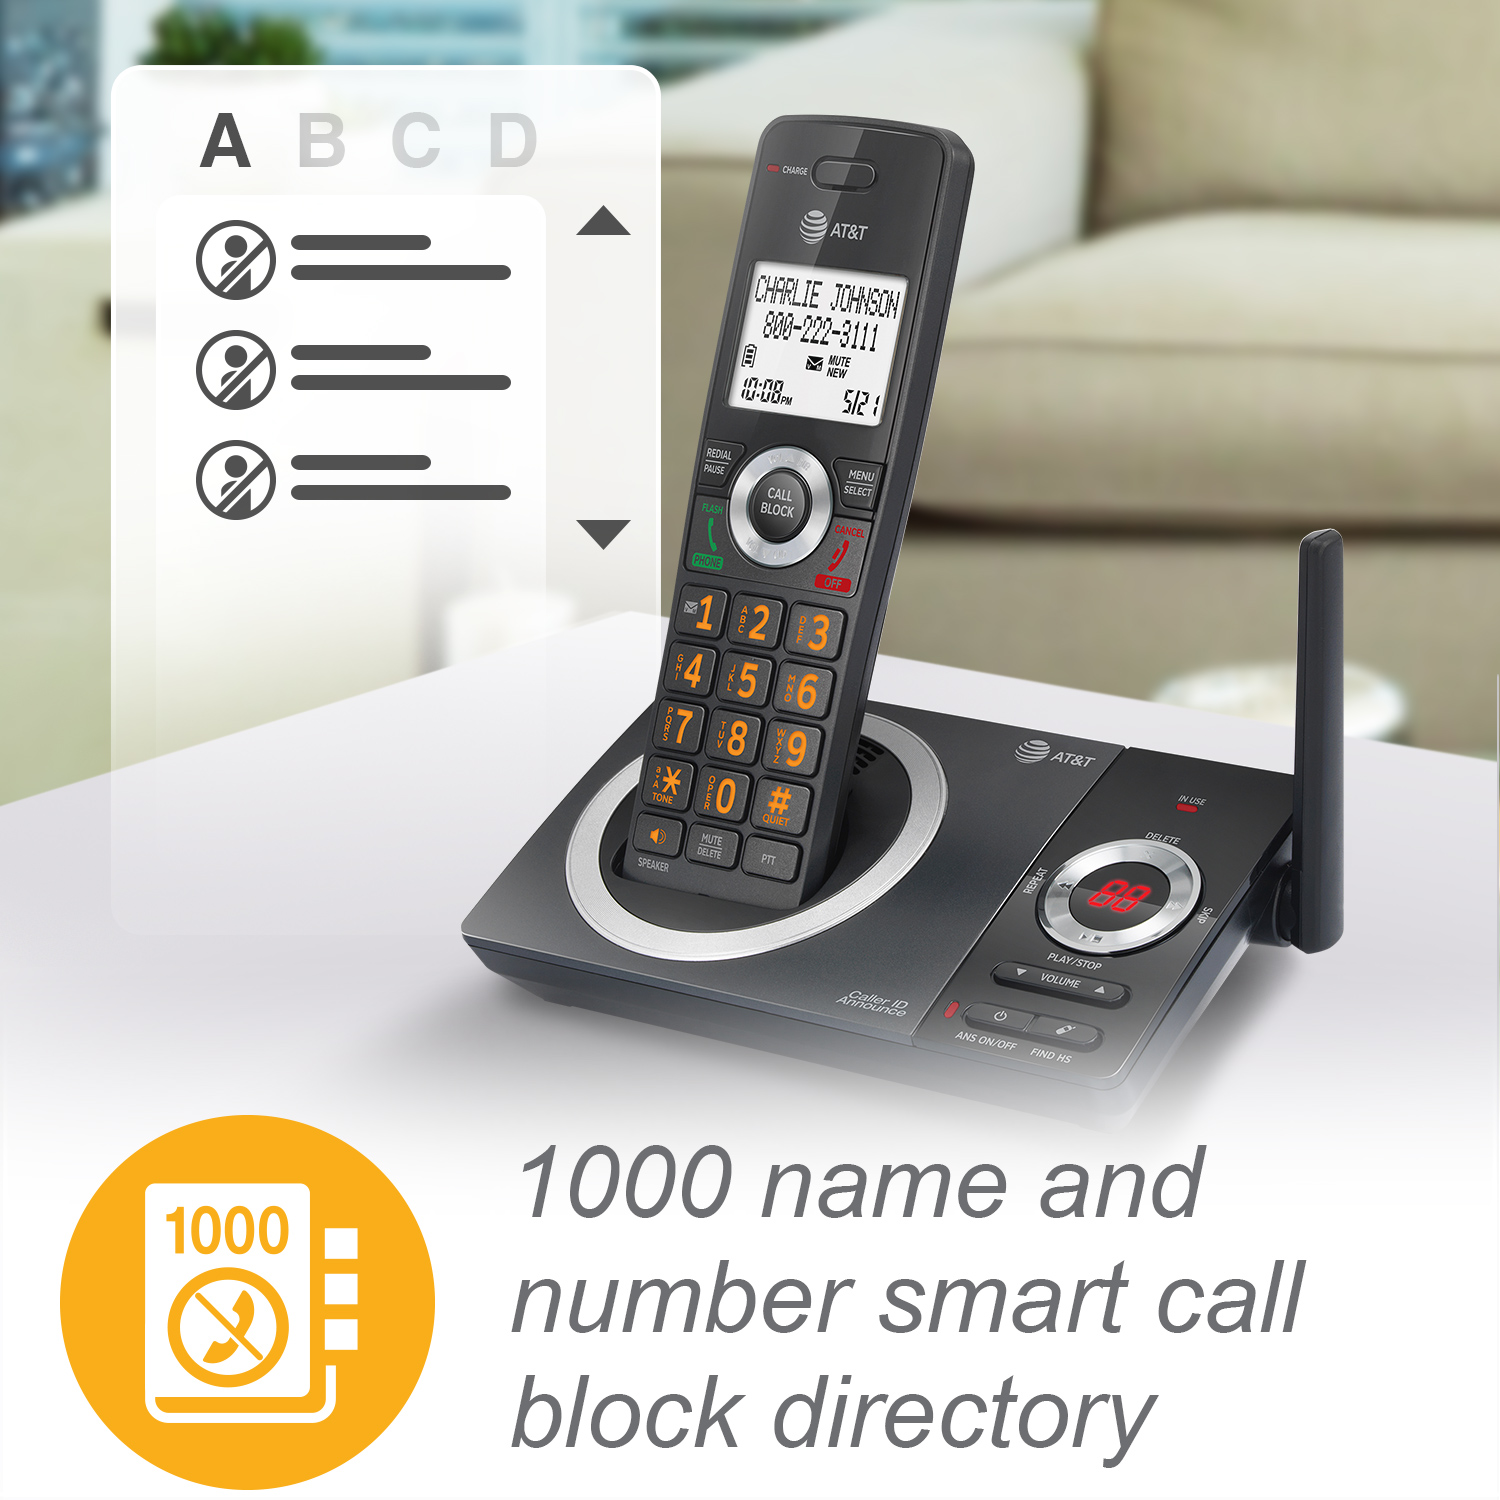 3-Handset Expandable Cordless Phone with Unsurpassed Range, Smart Call Blocker and Answering System - view 7